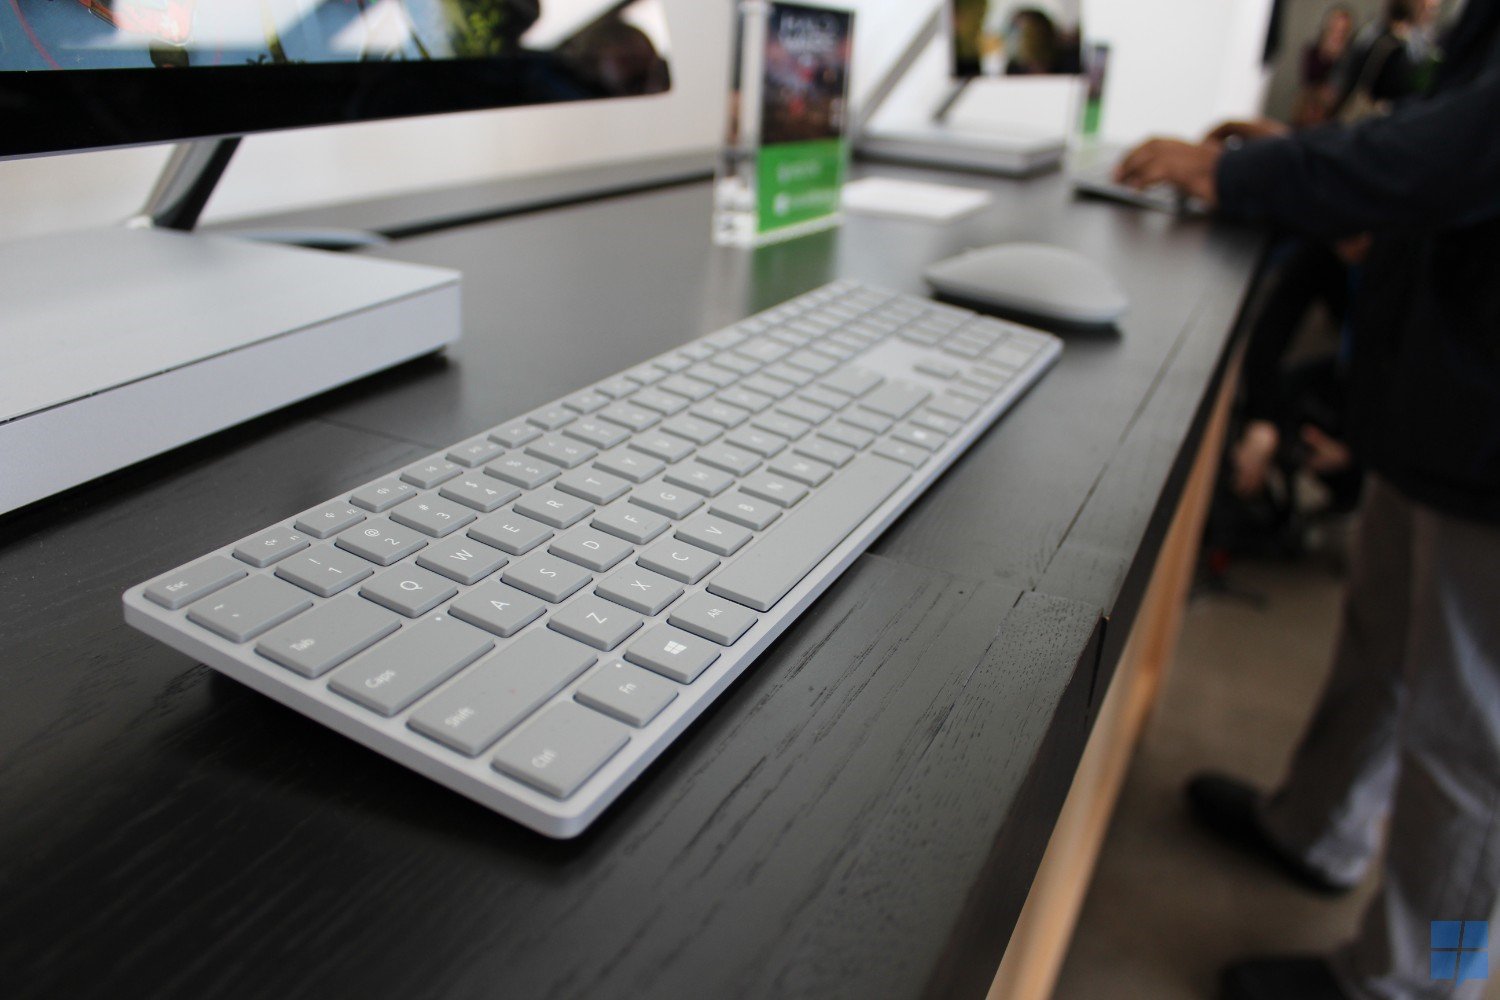 Microsoft might launch a new wireless Keyboard and mouse at the Surface event